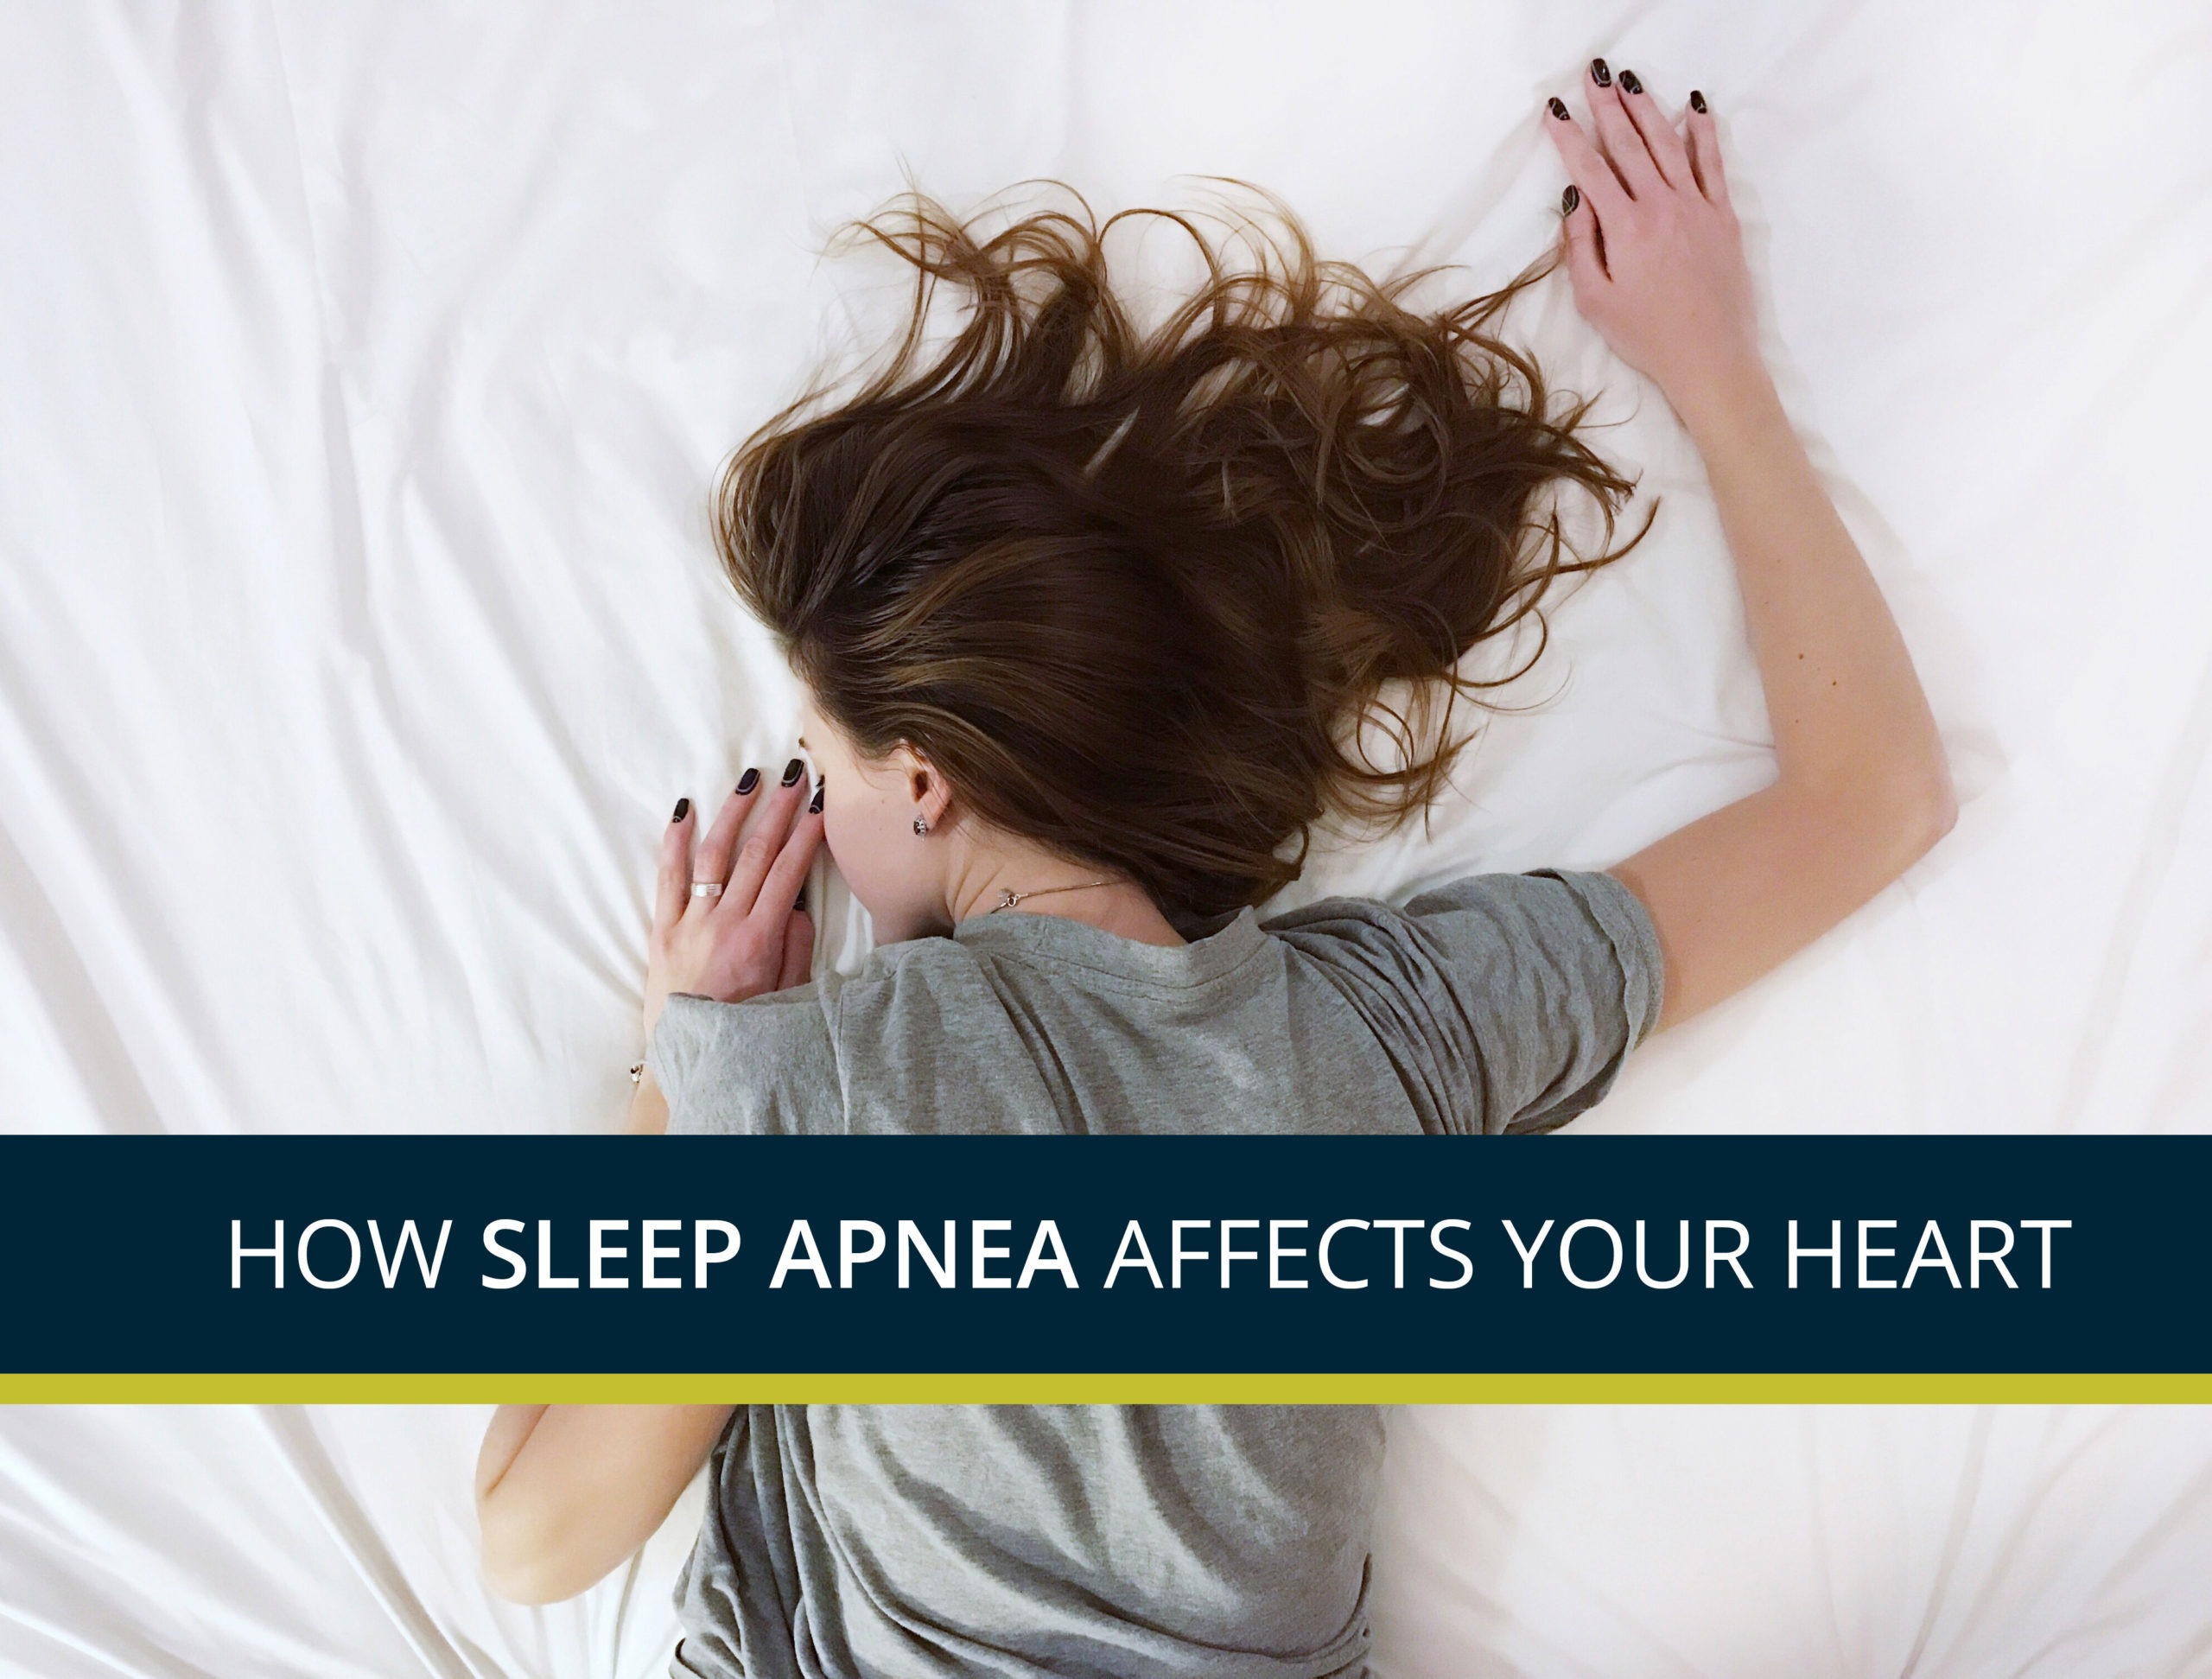 For more information about how sleep apnea affects your heart, make an appointment to see one of our heart doctors in Macomb County or St. Clair County.